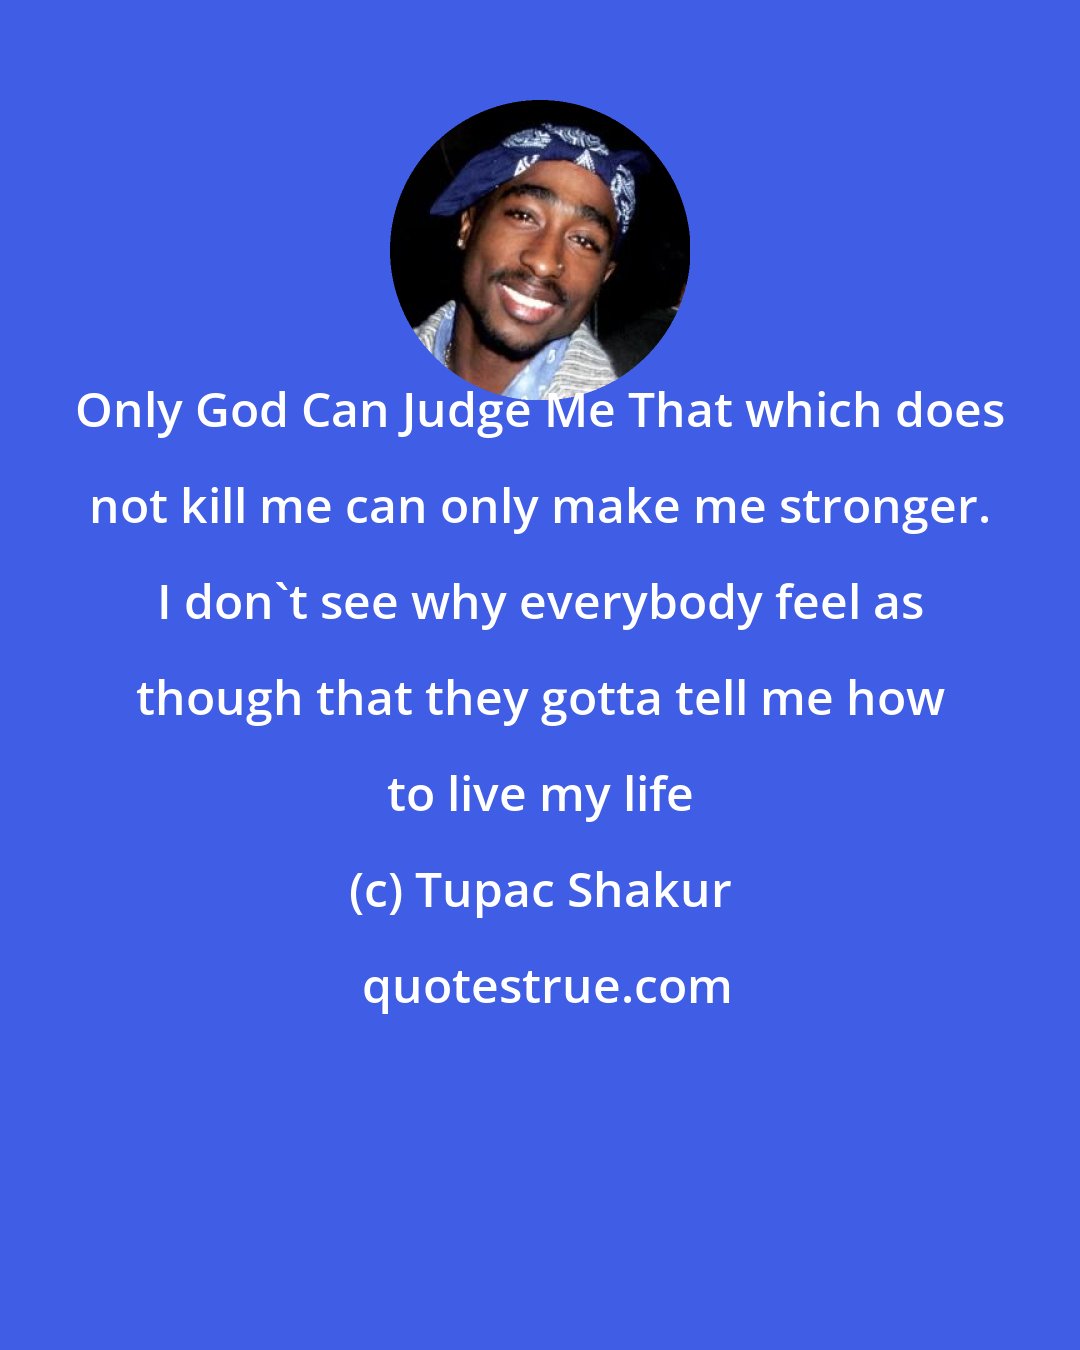 Tupac Shakur: Only God Can Judge Me That which does not kill me can only make me stronger. I don't see why everybody feel as though that they gotta tell me how to live my life